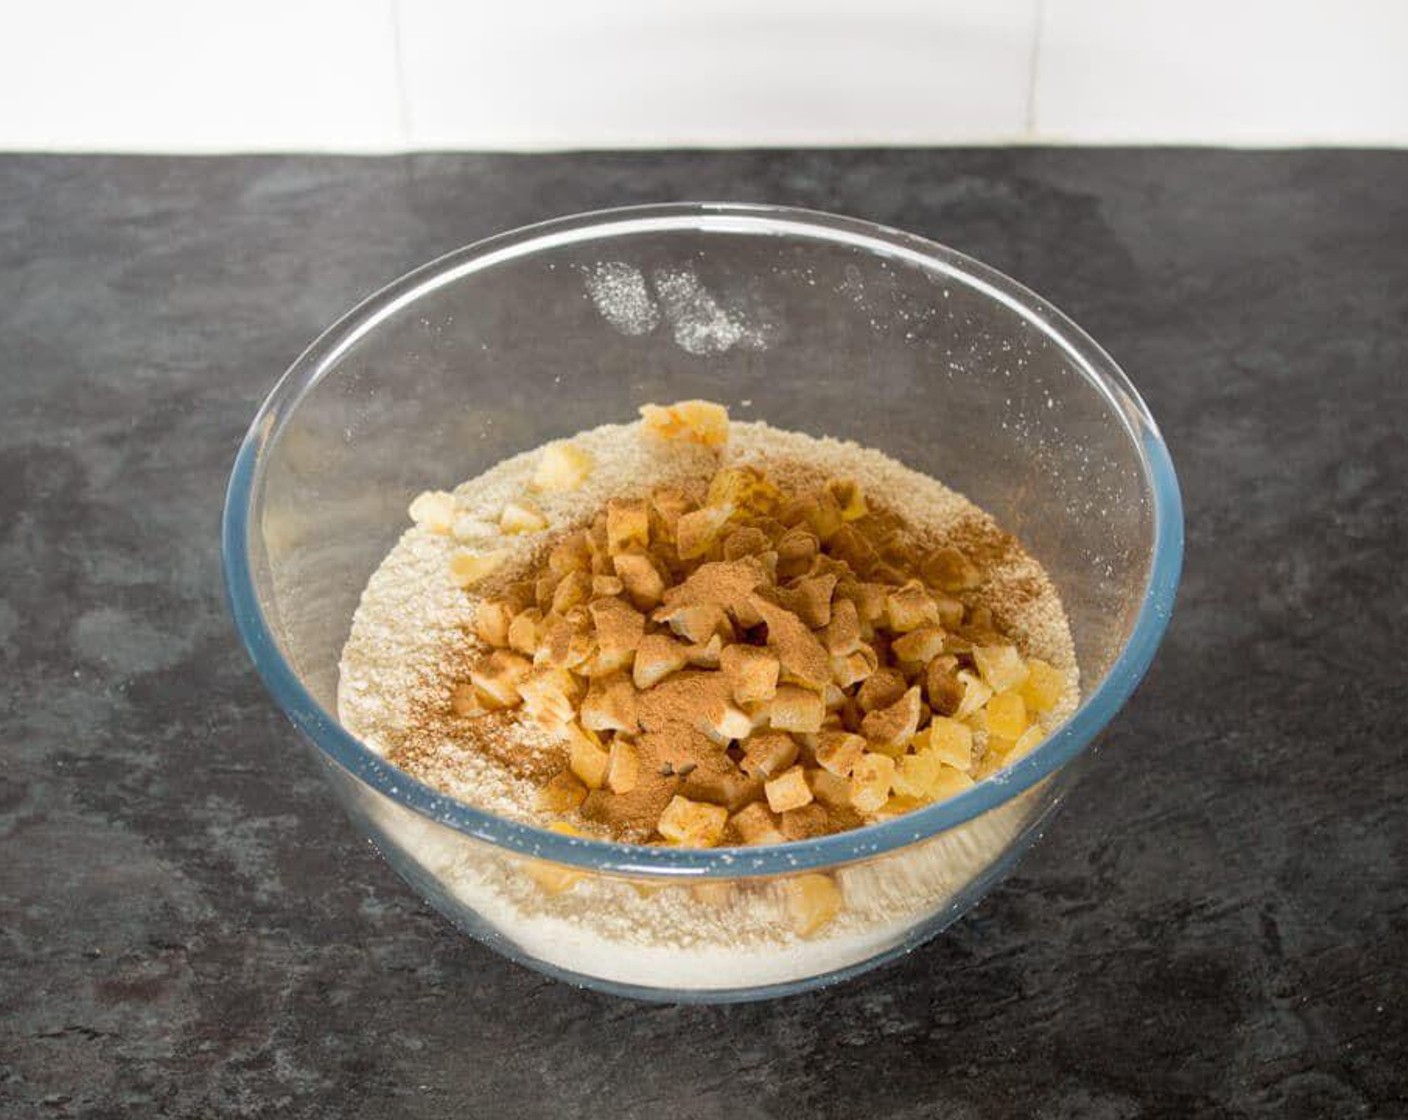 step 3 Tip into a large bowl and mix with the remaining Quick Cooking Oats (1 1/2 cups). Mix in the Ground Cinnamon (1/2 Tbsp), Dried Apples (1 1/4 cups), and Salt (1/4 tsp), and then set to one side.